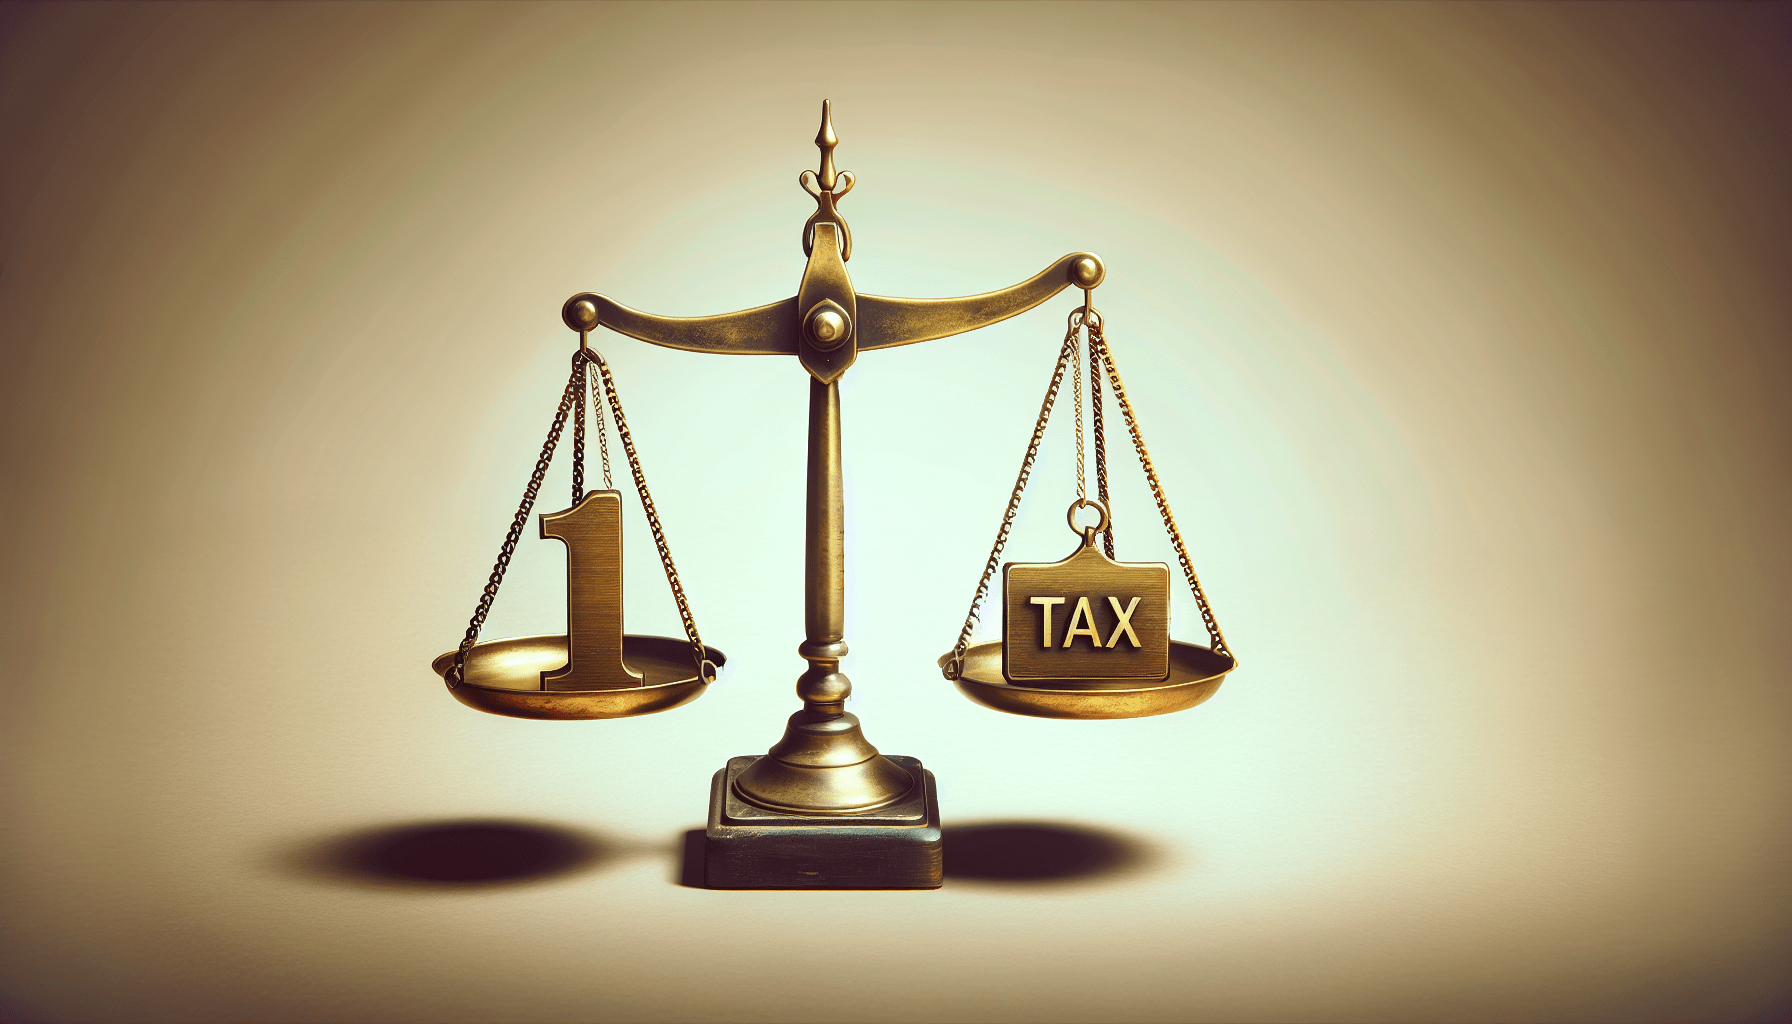 Is It Better To Claim 1 Or 0 On Your Taxes?